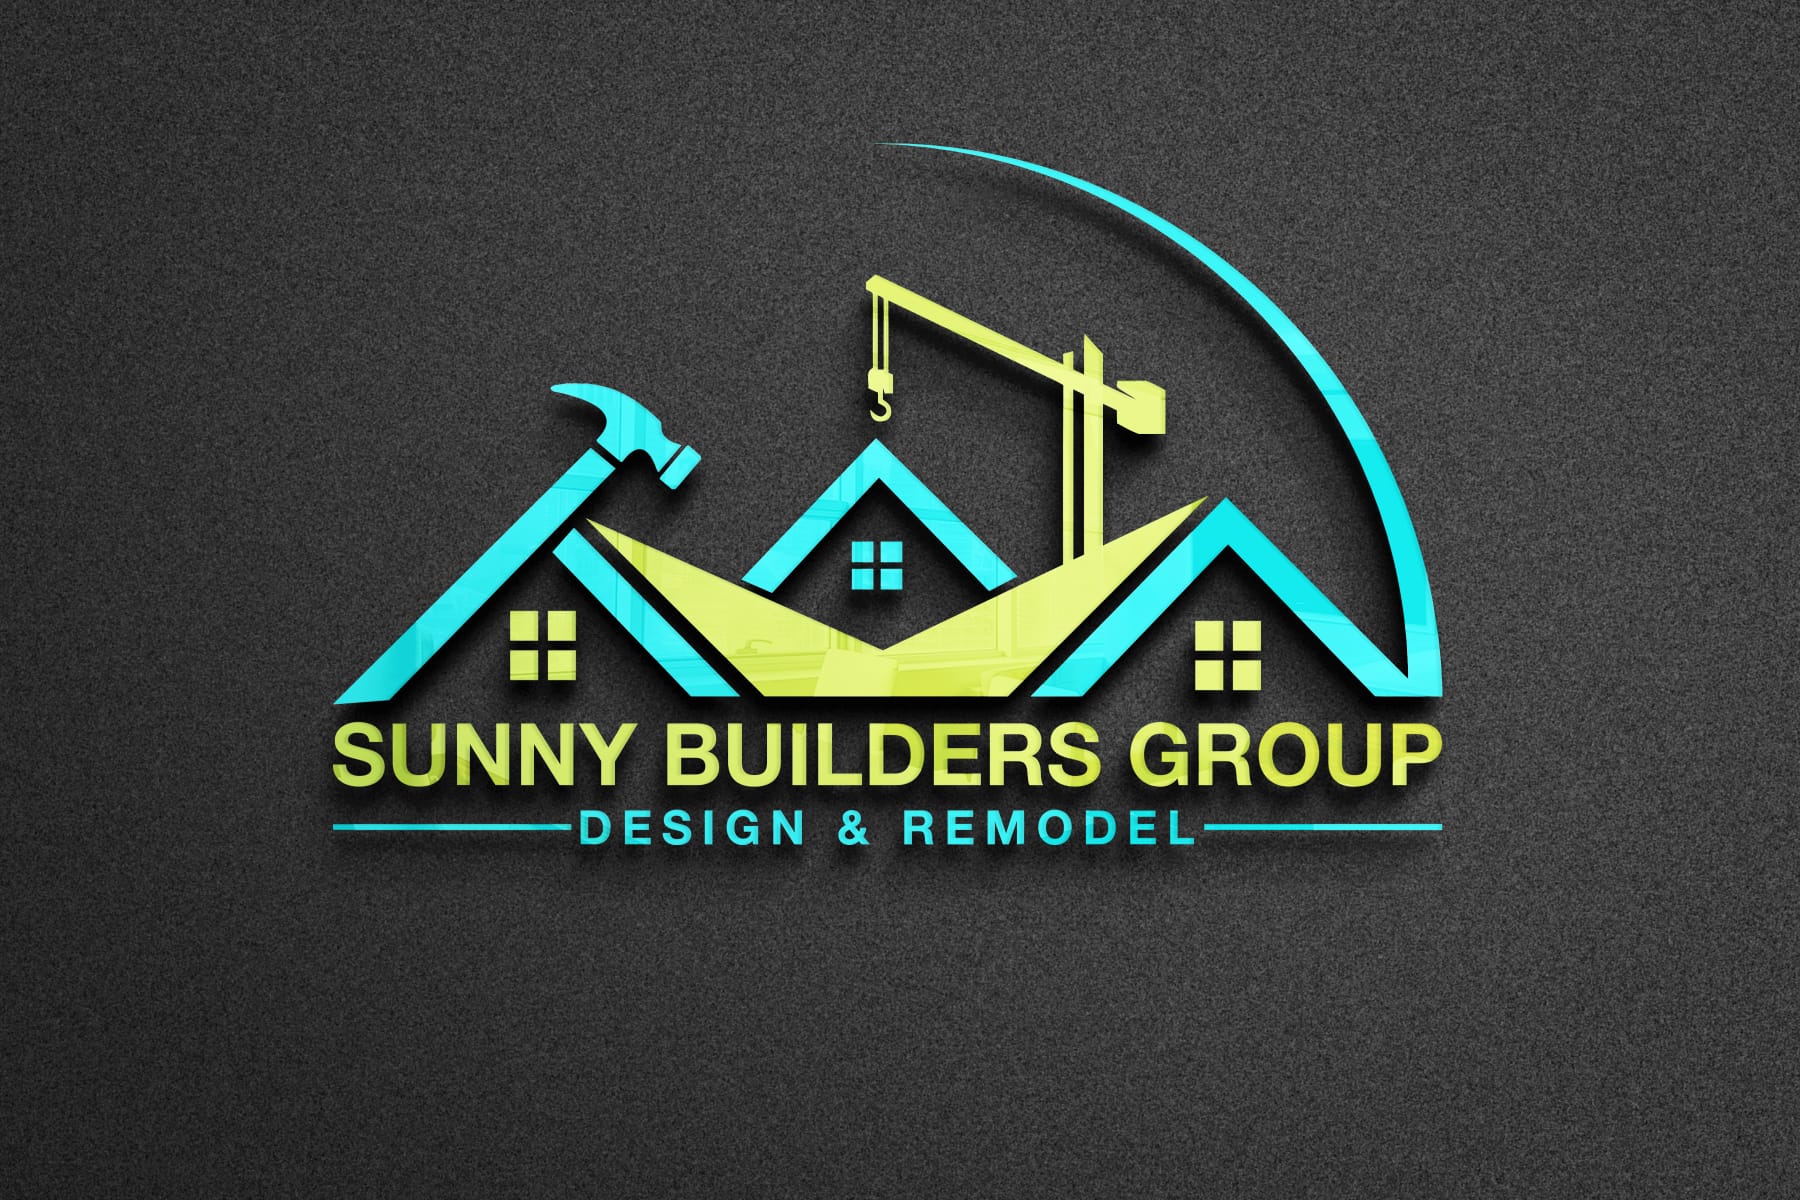 Sunny Builders Group Backyard Design Transforms San Diego Landscapes with Expert Hardscape and Landscape Services